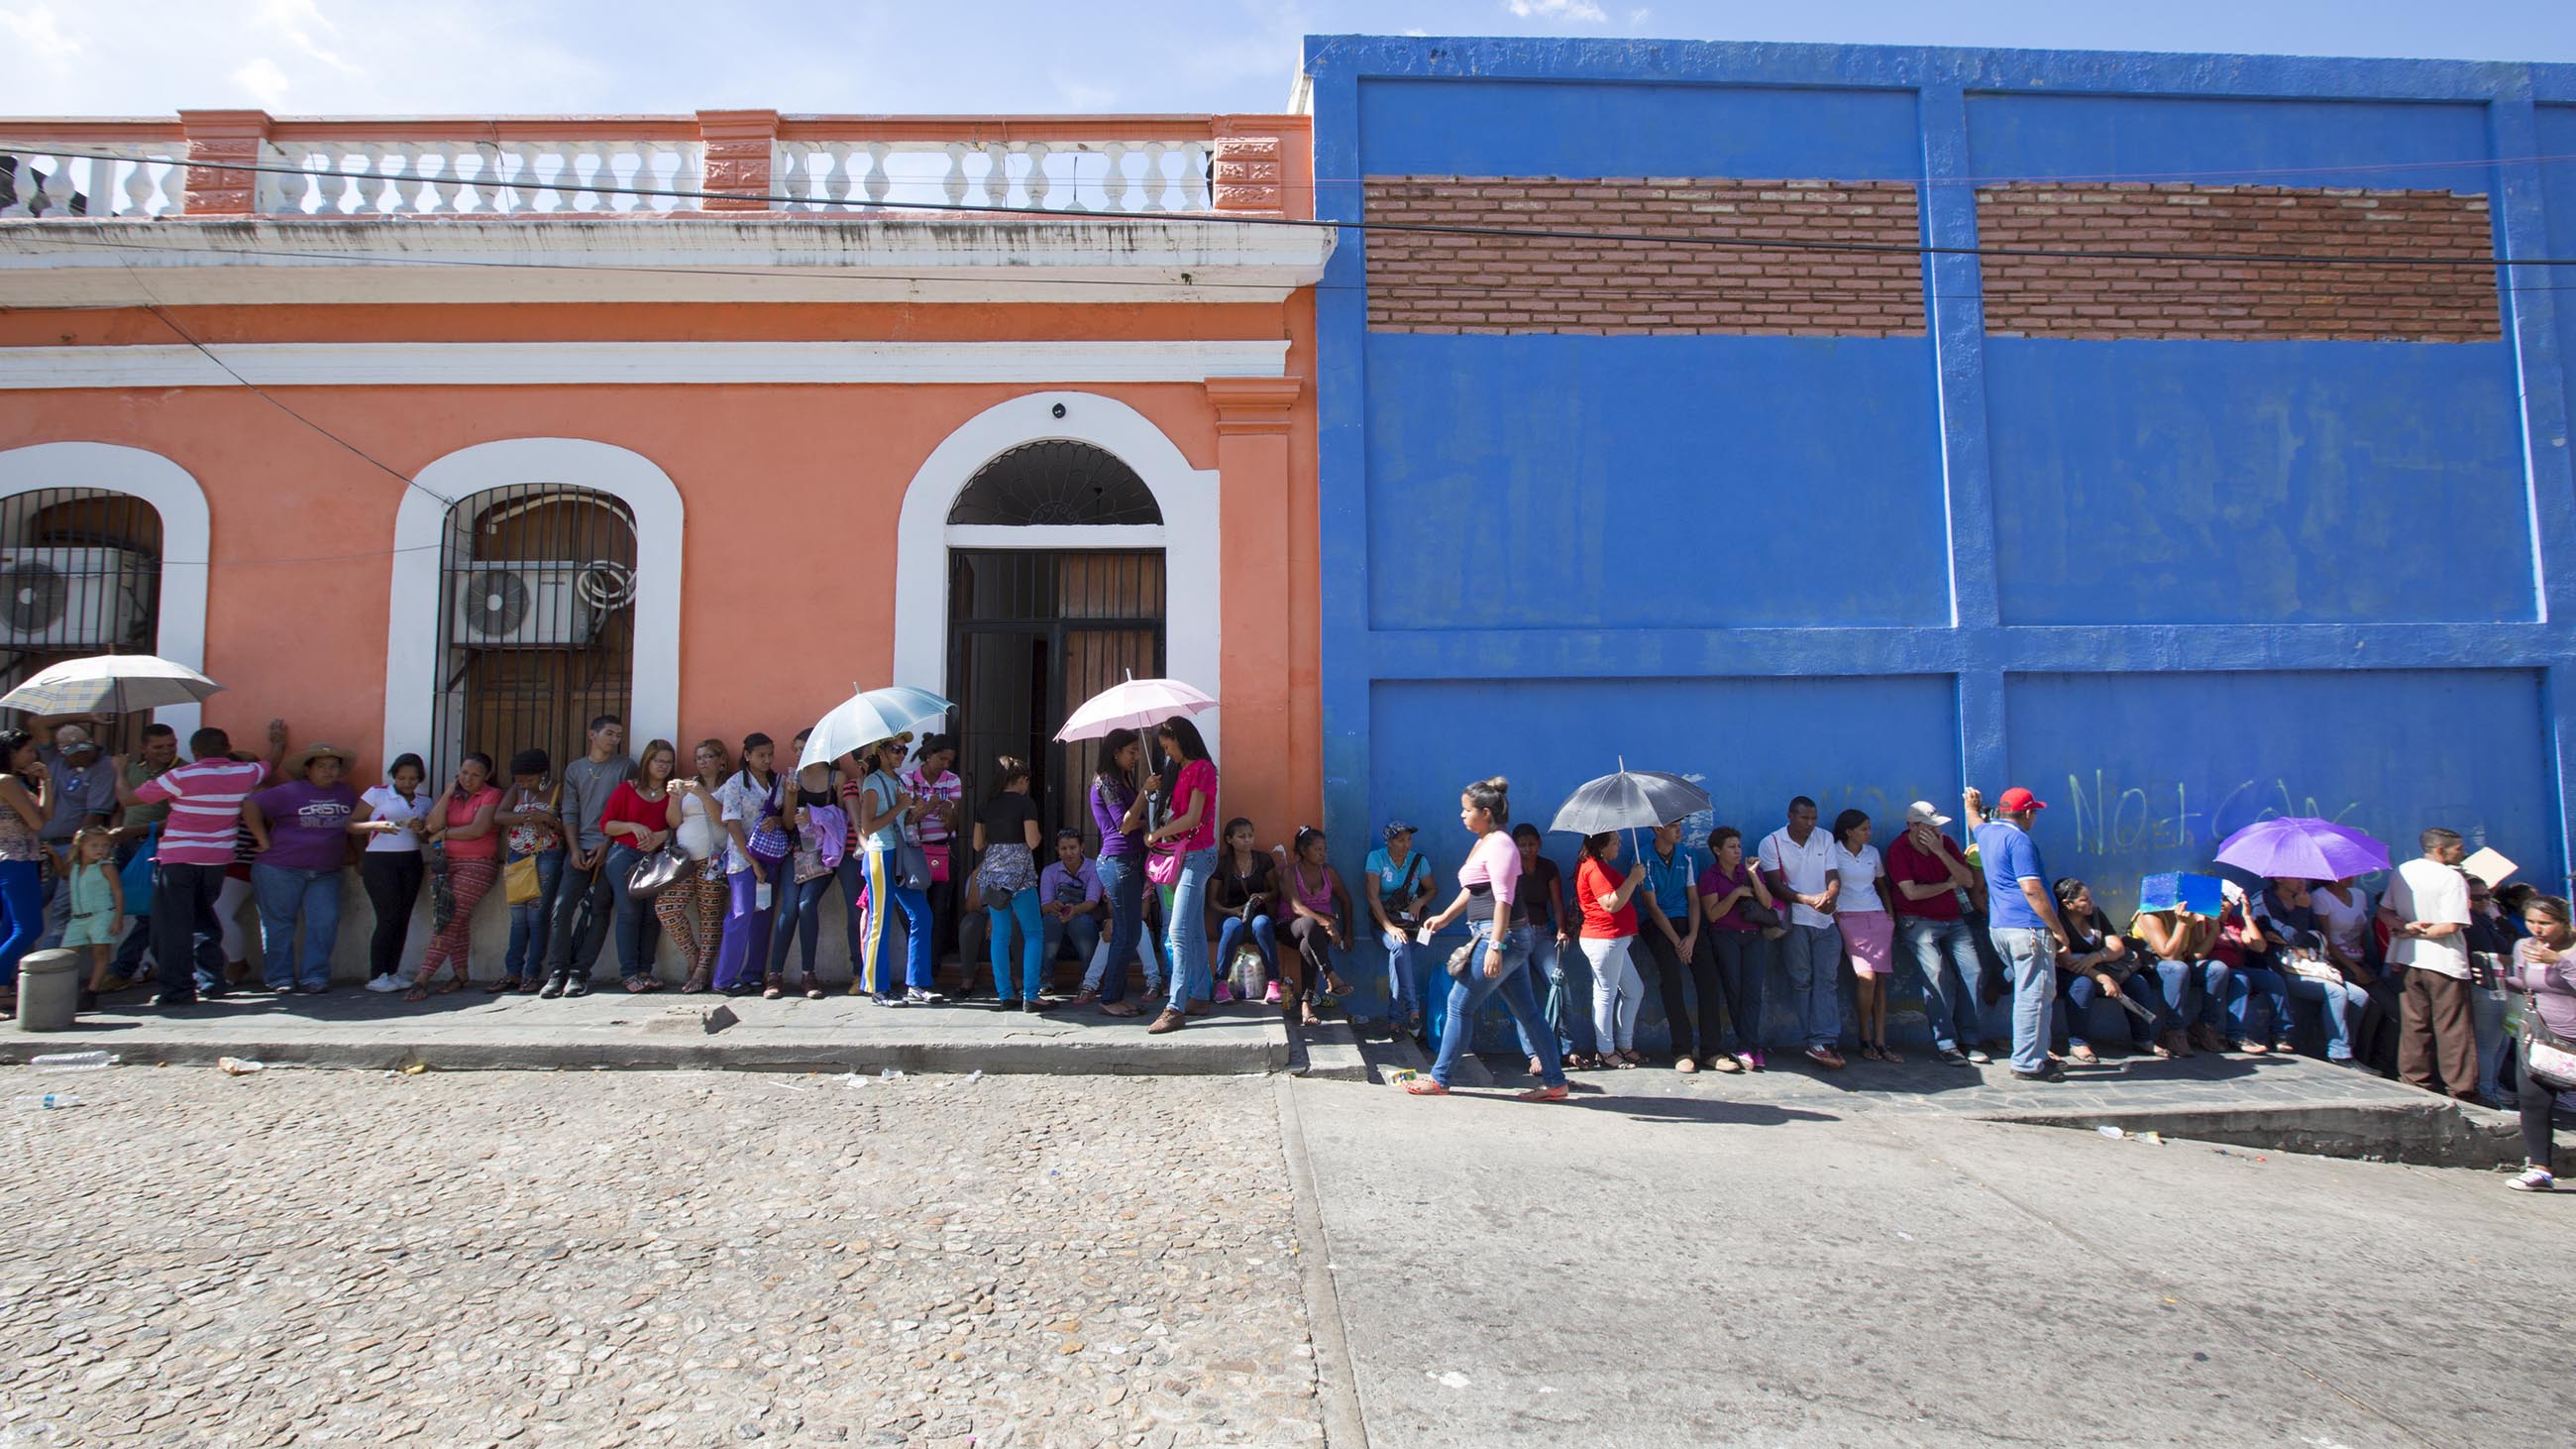 As Zika takes hold, Venezuelans are facing long lines and shortages for everything from groceries to medications. Pfizer has stepped in, but much more is needed.